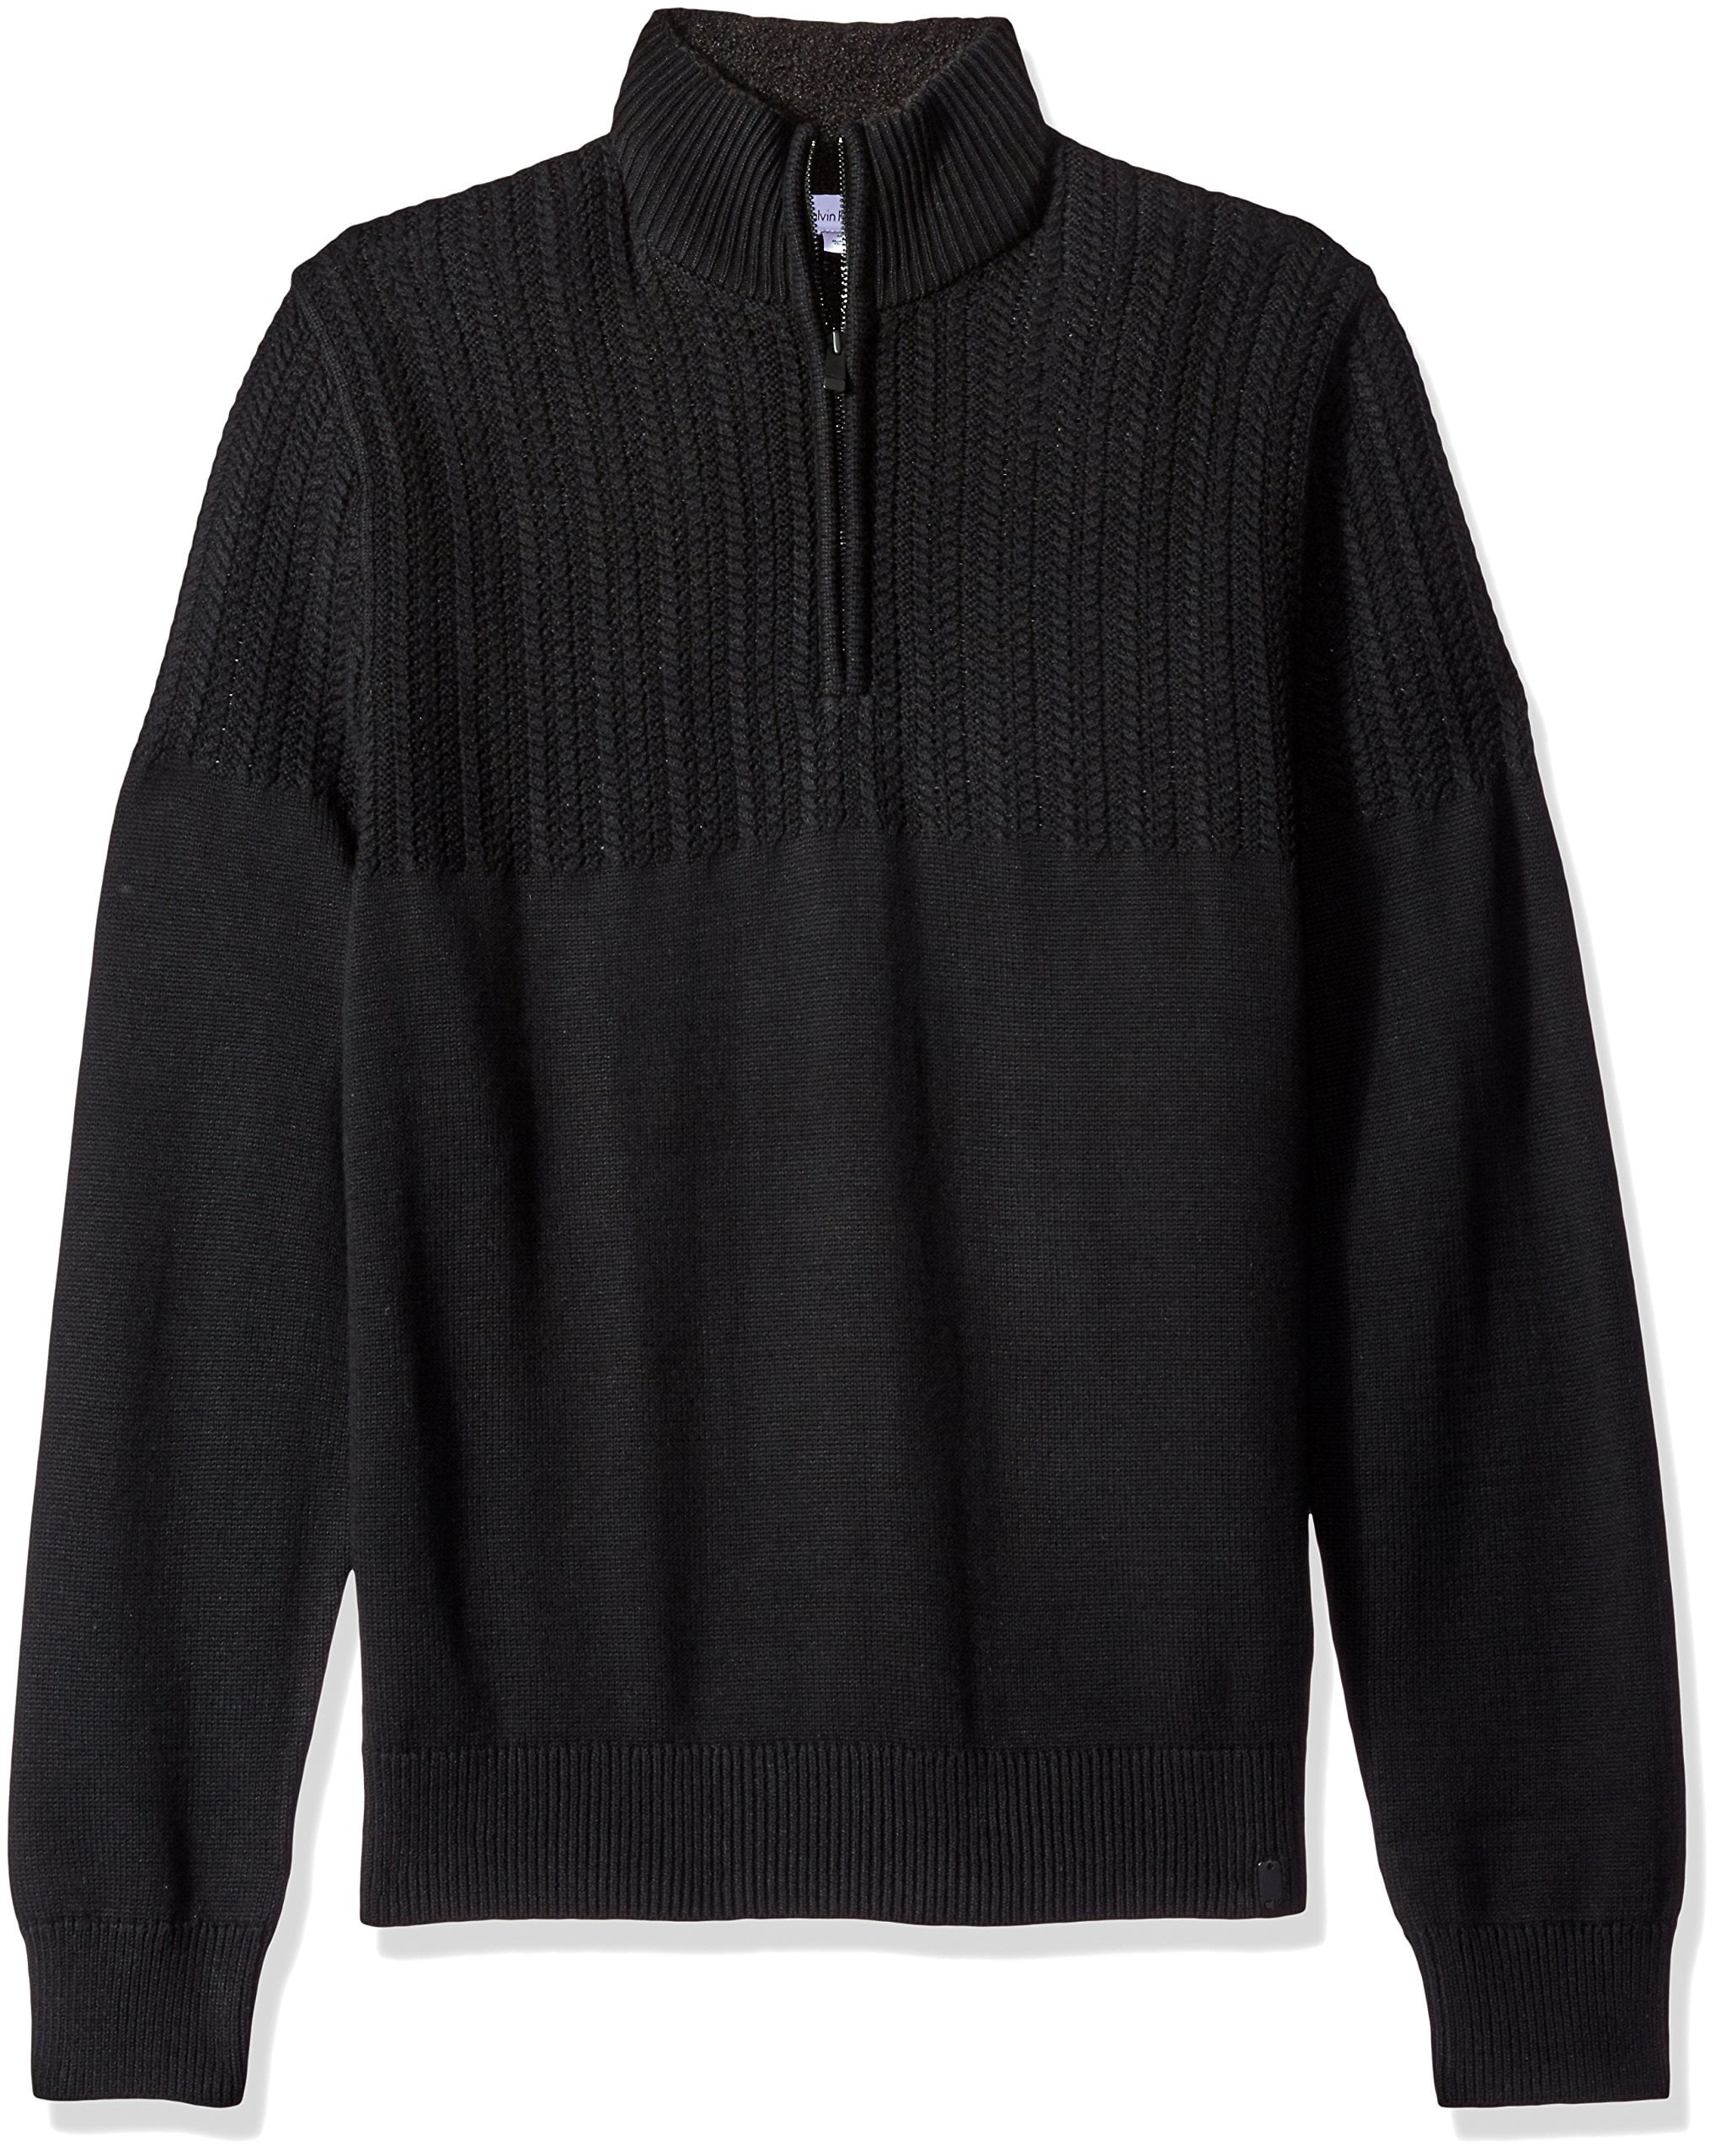 Calvin Klein NEW Black Mens Size Small S 1/2 Zip Mock-Neck Knit Sweater ...